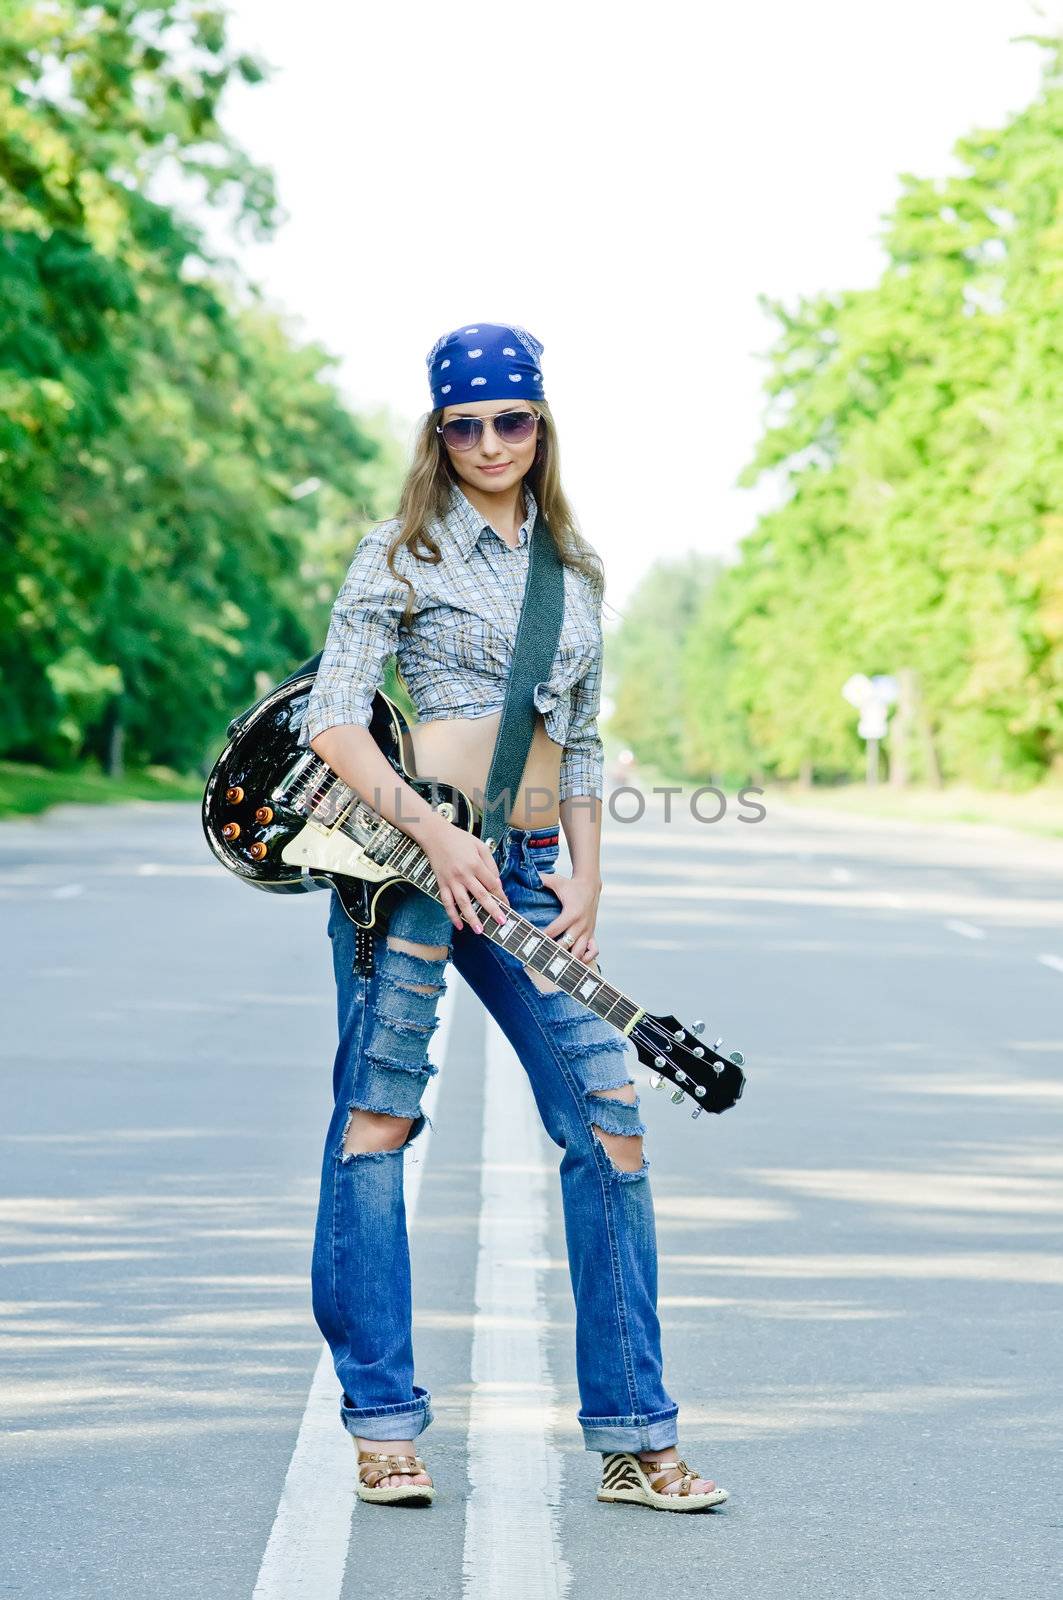 Rocking girl on a highway road with guitar